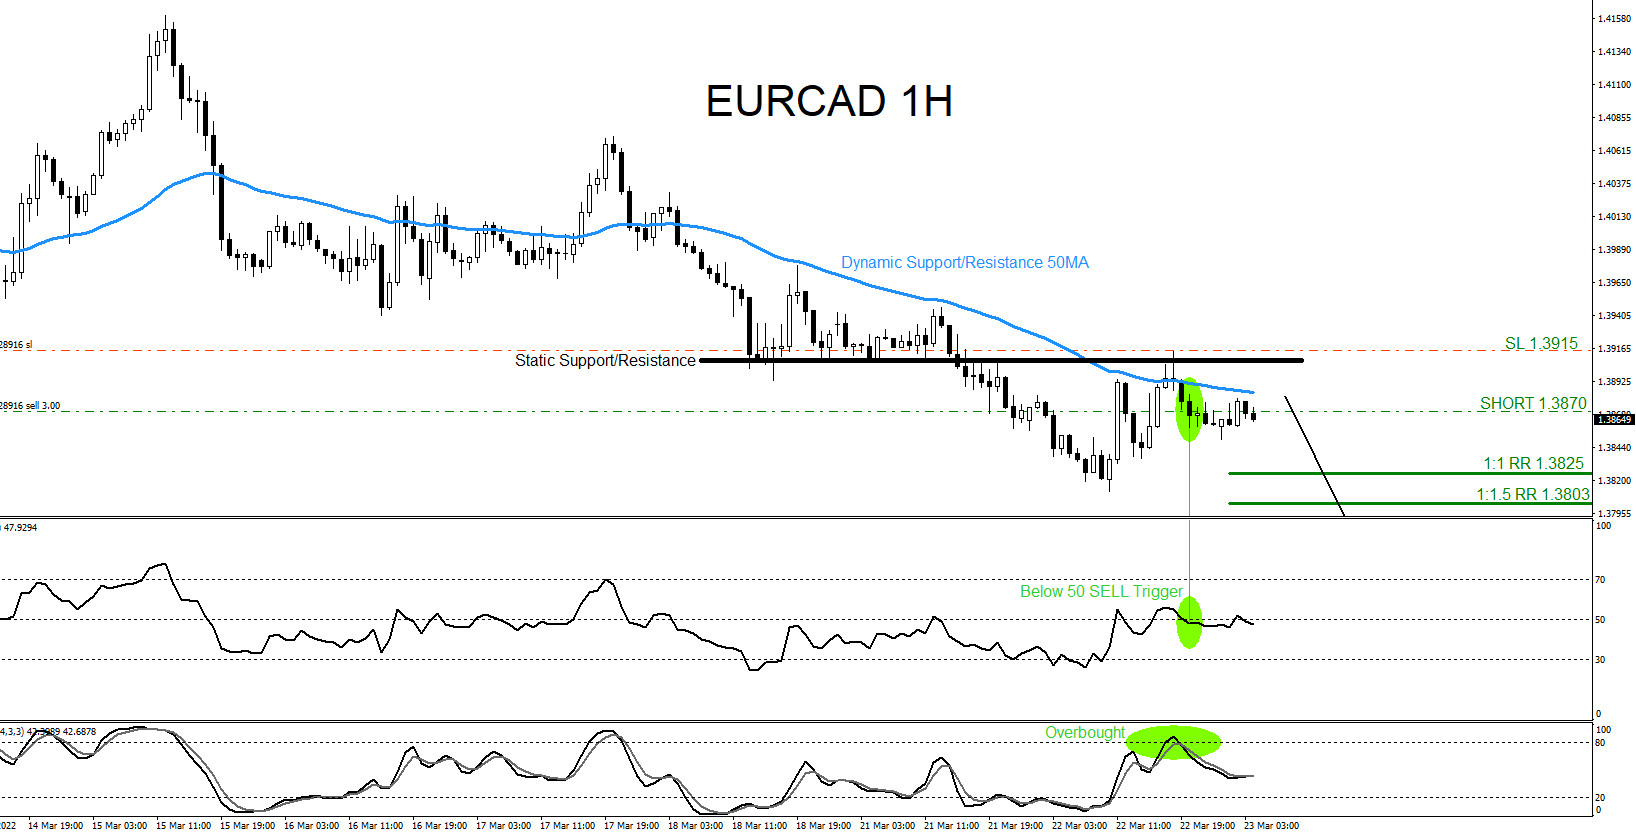 EURCAD : Trading the Move Lower